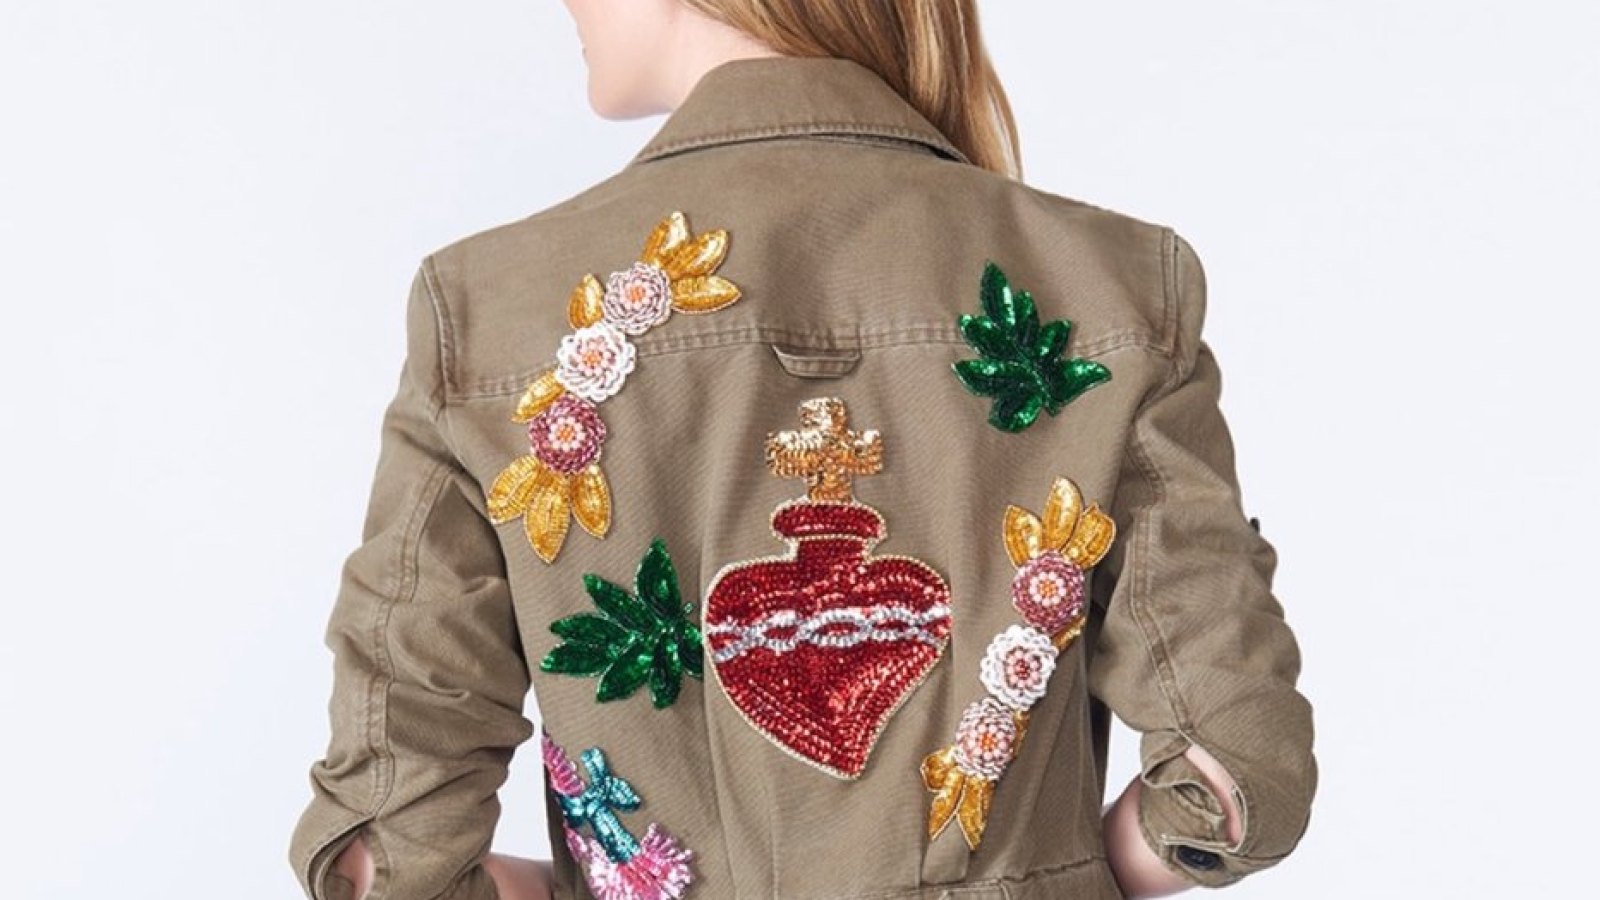 veronica beard corduroy jacket with sequins along the back